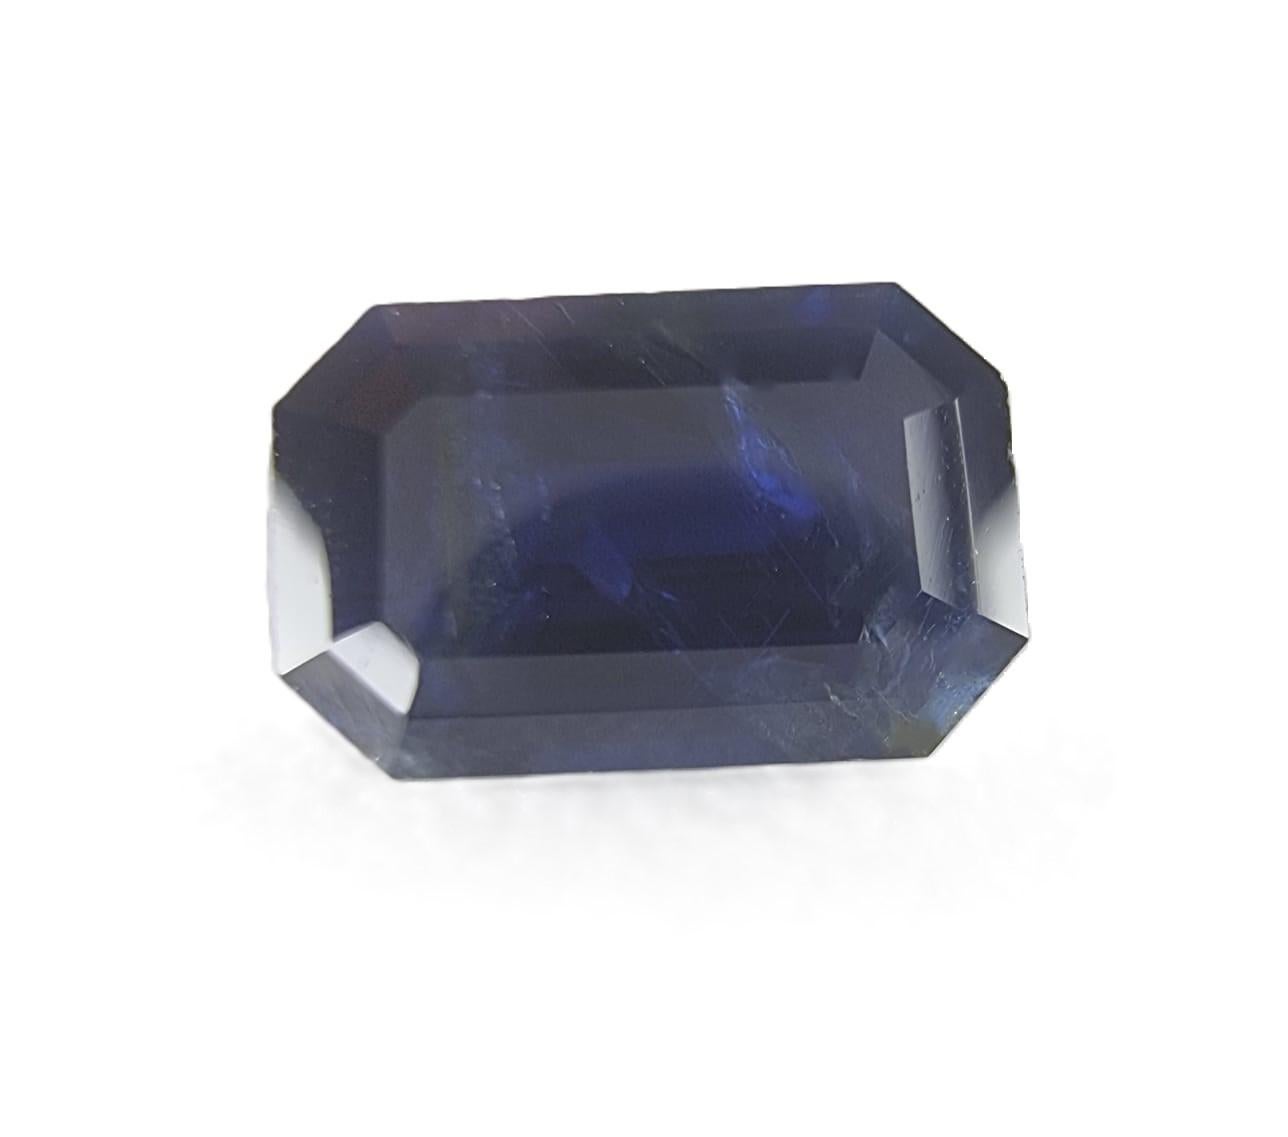 4.39ct Rectangular Cut Natural Dark Blue Sapphire with distinctive qualities make it an ideal choice for your next jewelry project:
The rectangular cut is a classic and versatile choice, highlighting the sapphire's natural qualities and allowing it